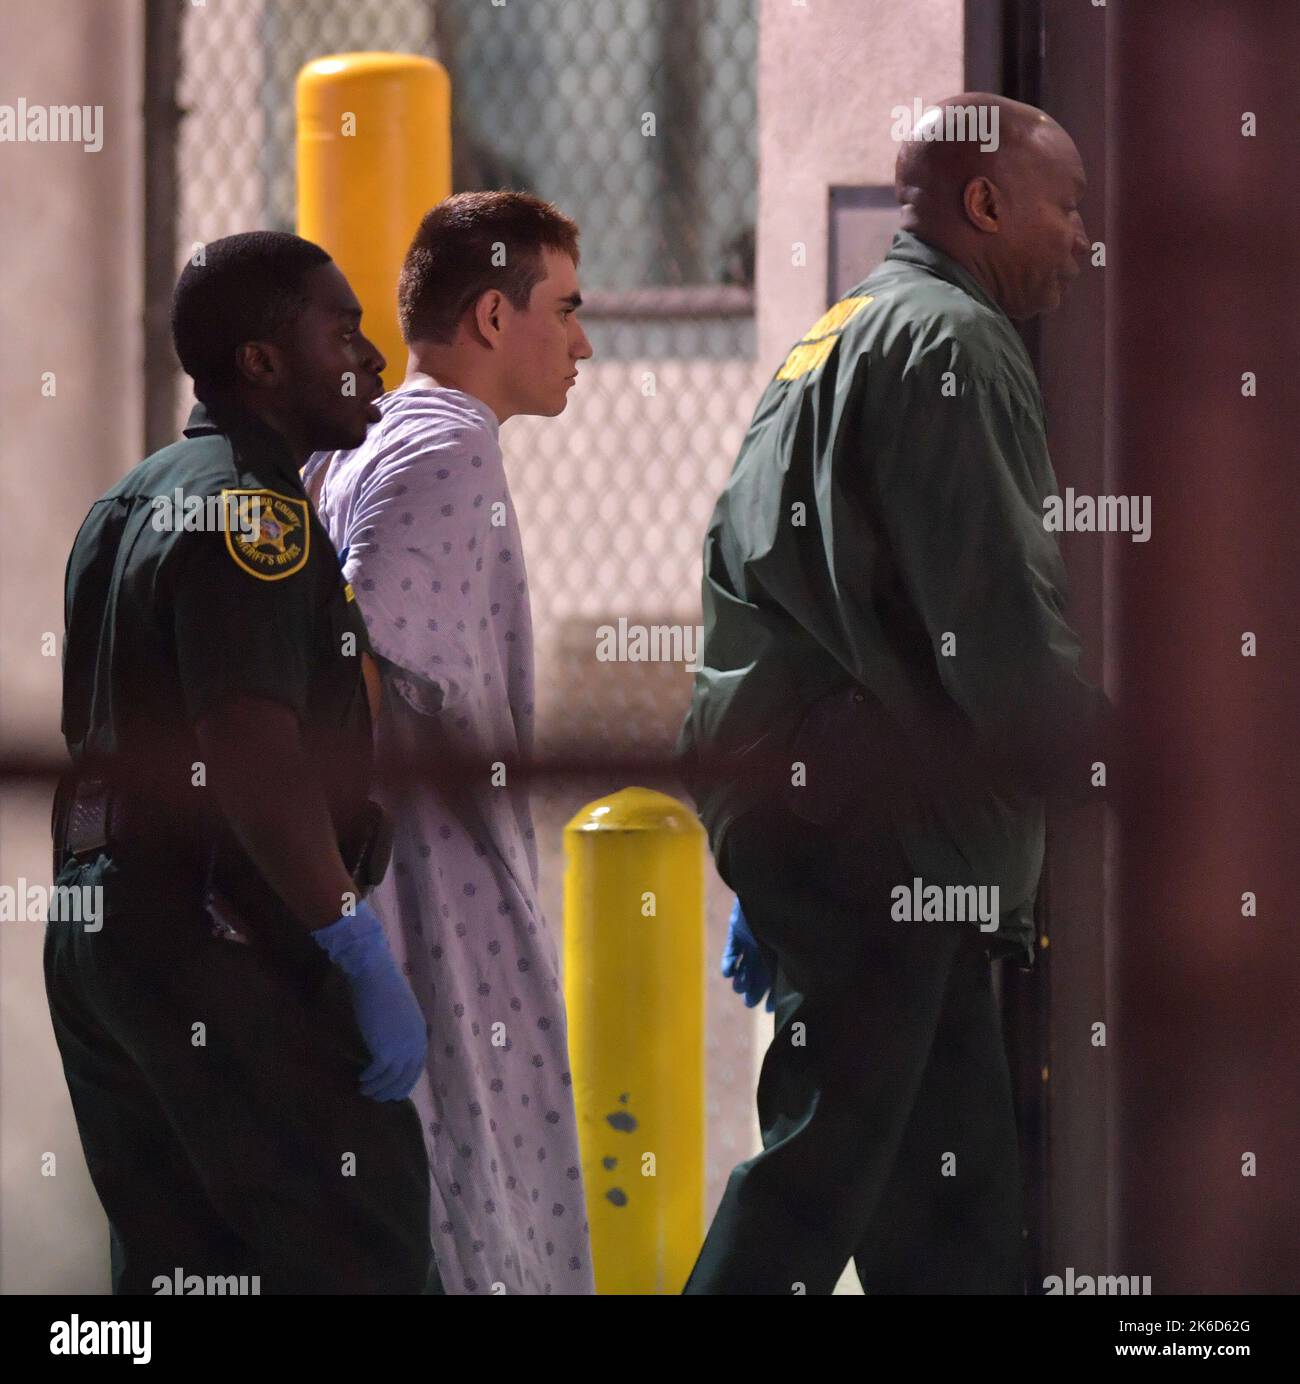 (EXCLUSIVE STILL PHOTOS) - NO SOCIAL MEDIA, INSTAGRAM, TWIITER OR FACEBOOK FORT LAUDERDALE, FL - FEBRUARY 14: Murder Suspect Nikolas Cruz, 19, Books Into Jail after School shooting at Marjory Stoneman Douglas High Which Killed 17 People on February 14, 2018 in Fort Lauderdale, People: Nikolas Cruz Credit: Storms Media Group/Alamy Live News Stock Photo